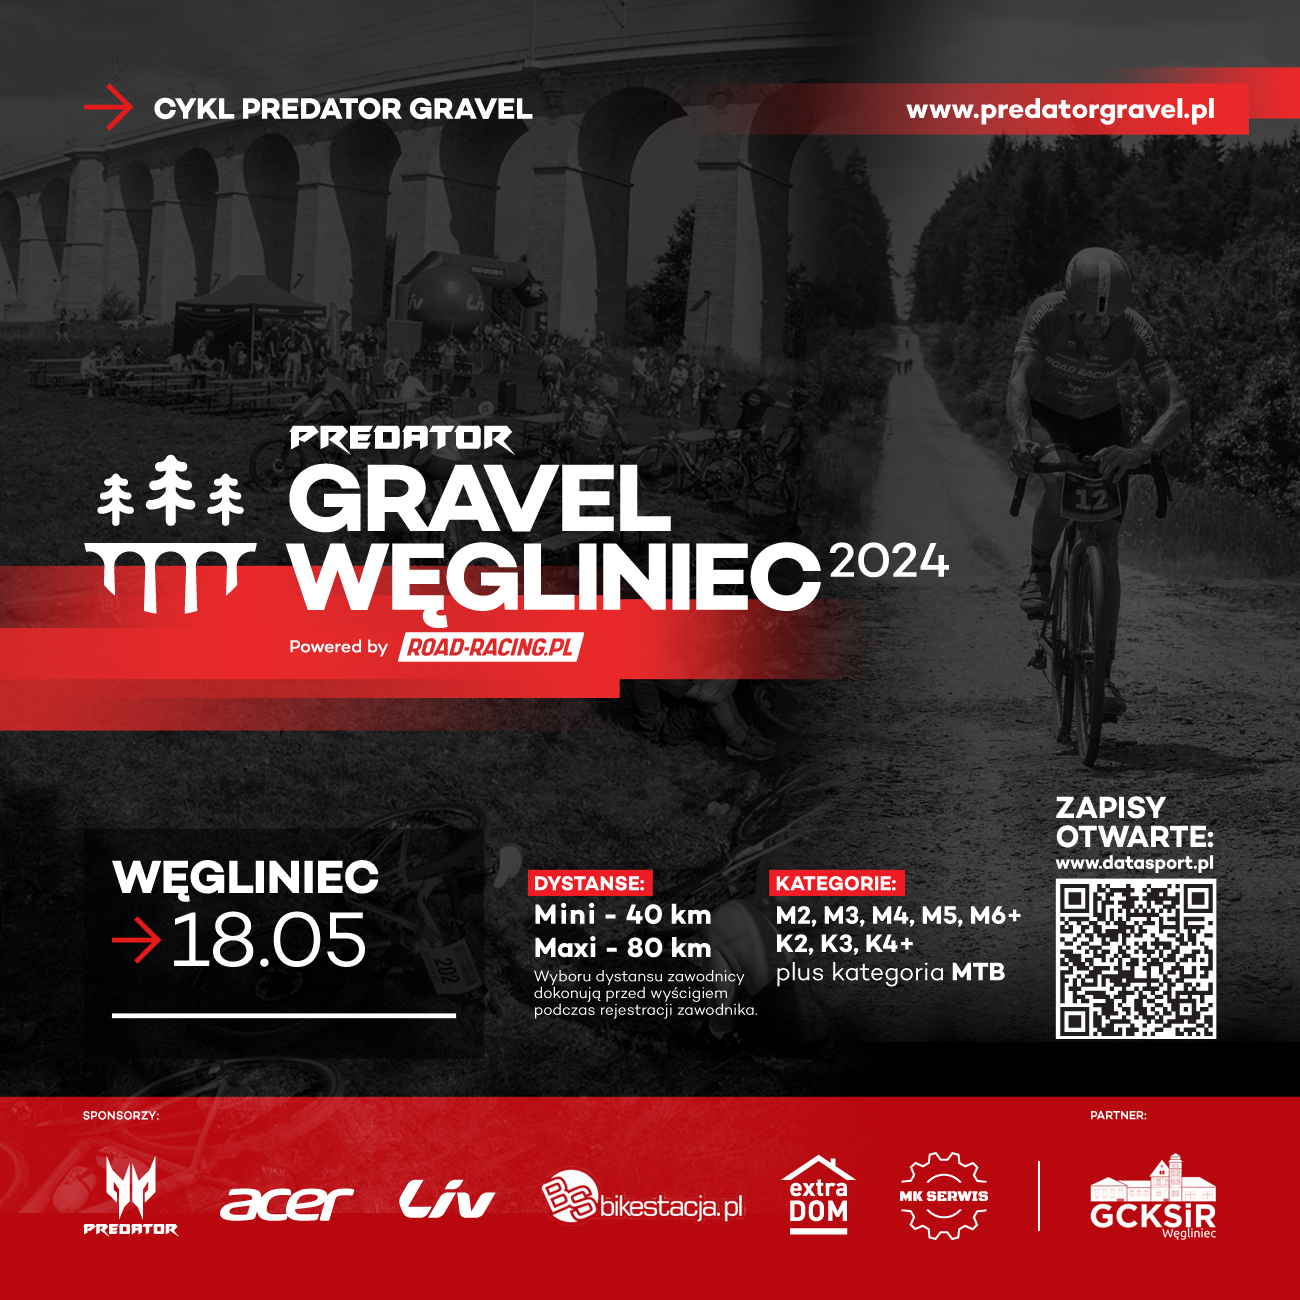 You are currently viewing WĘGLINIEC – PREDATOR GRAVEL